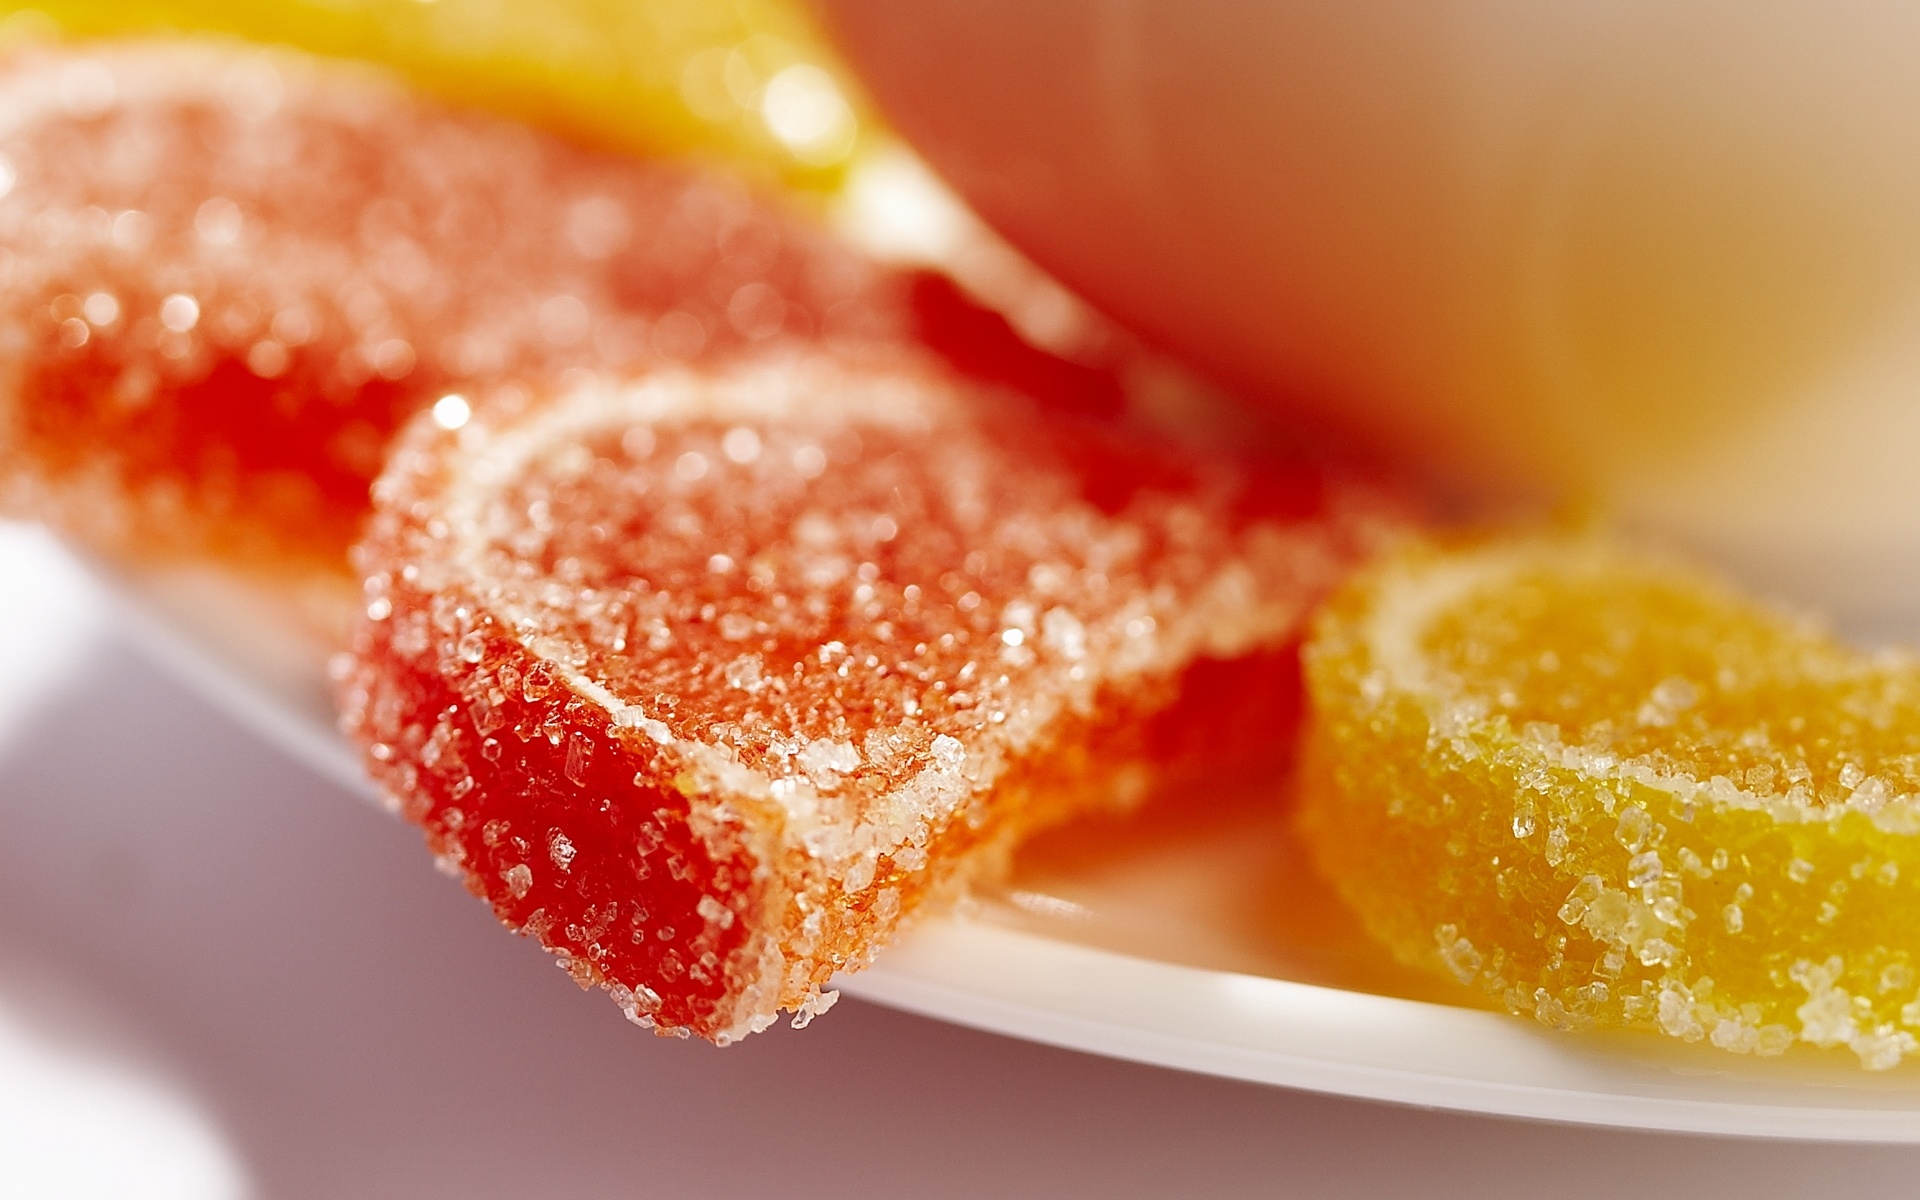 Scrumptious sweets, Colorful confections, Irresistible candies, Sugary indulgence, 1920x1200 HD Desktop